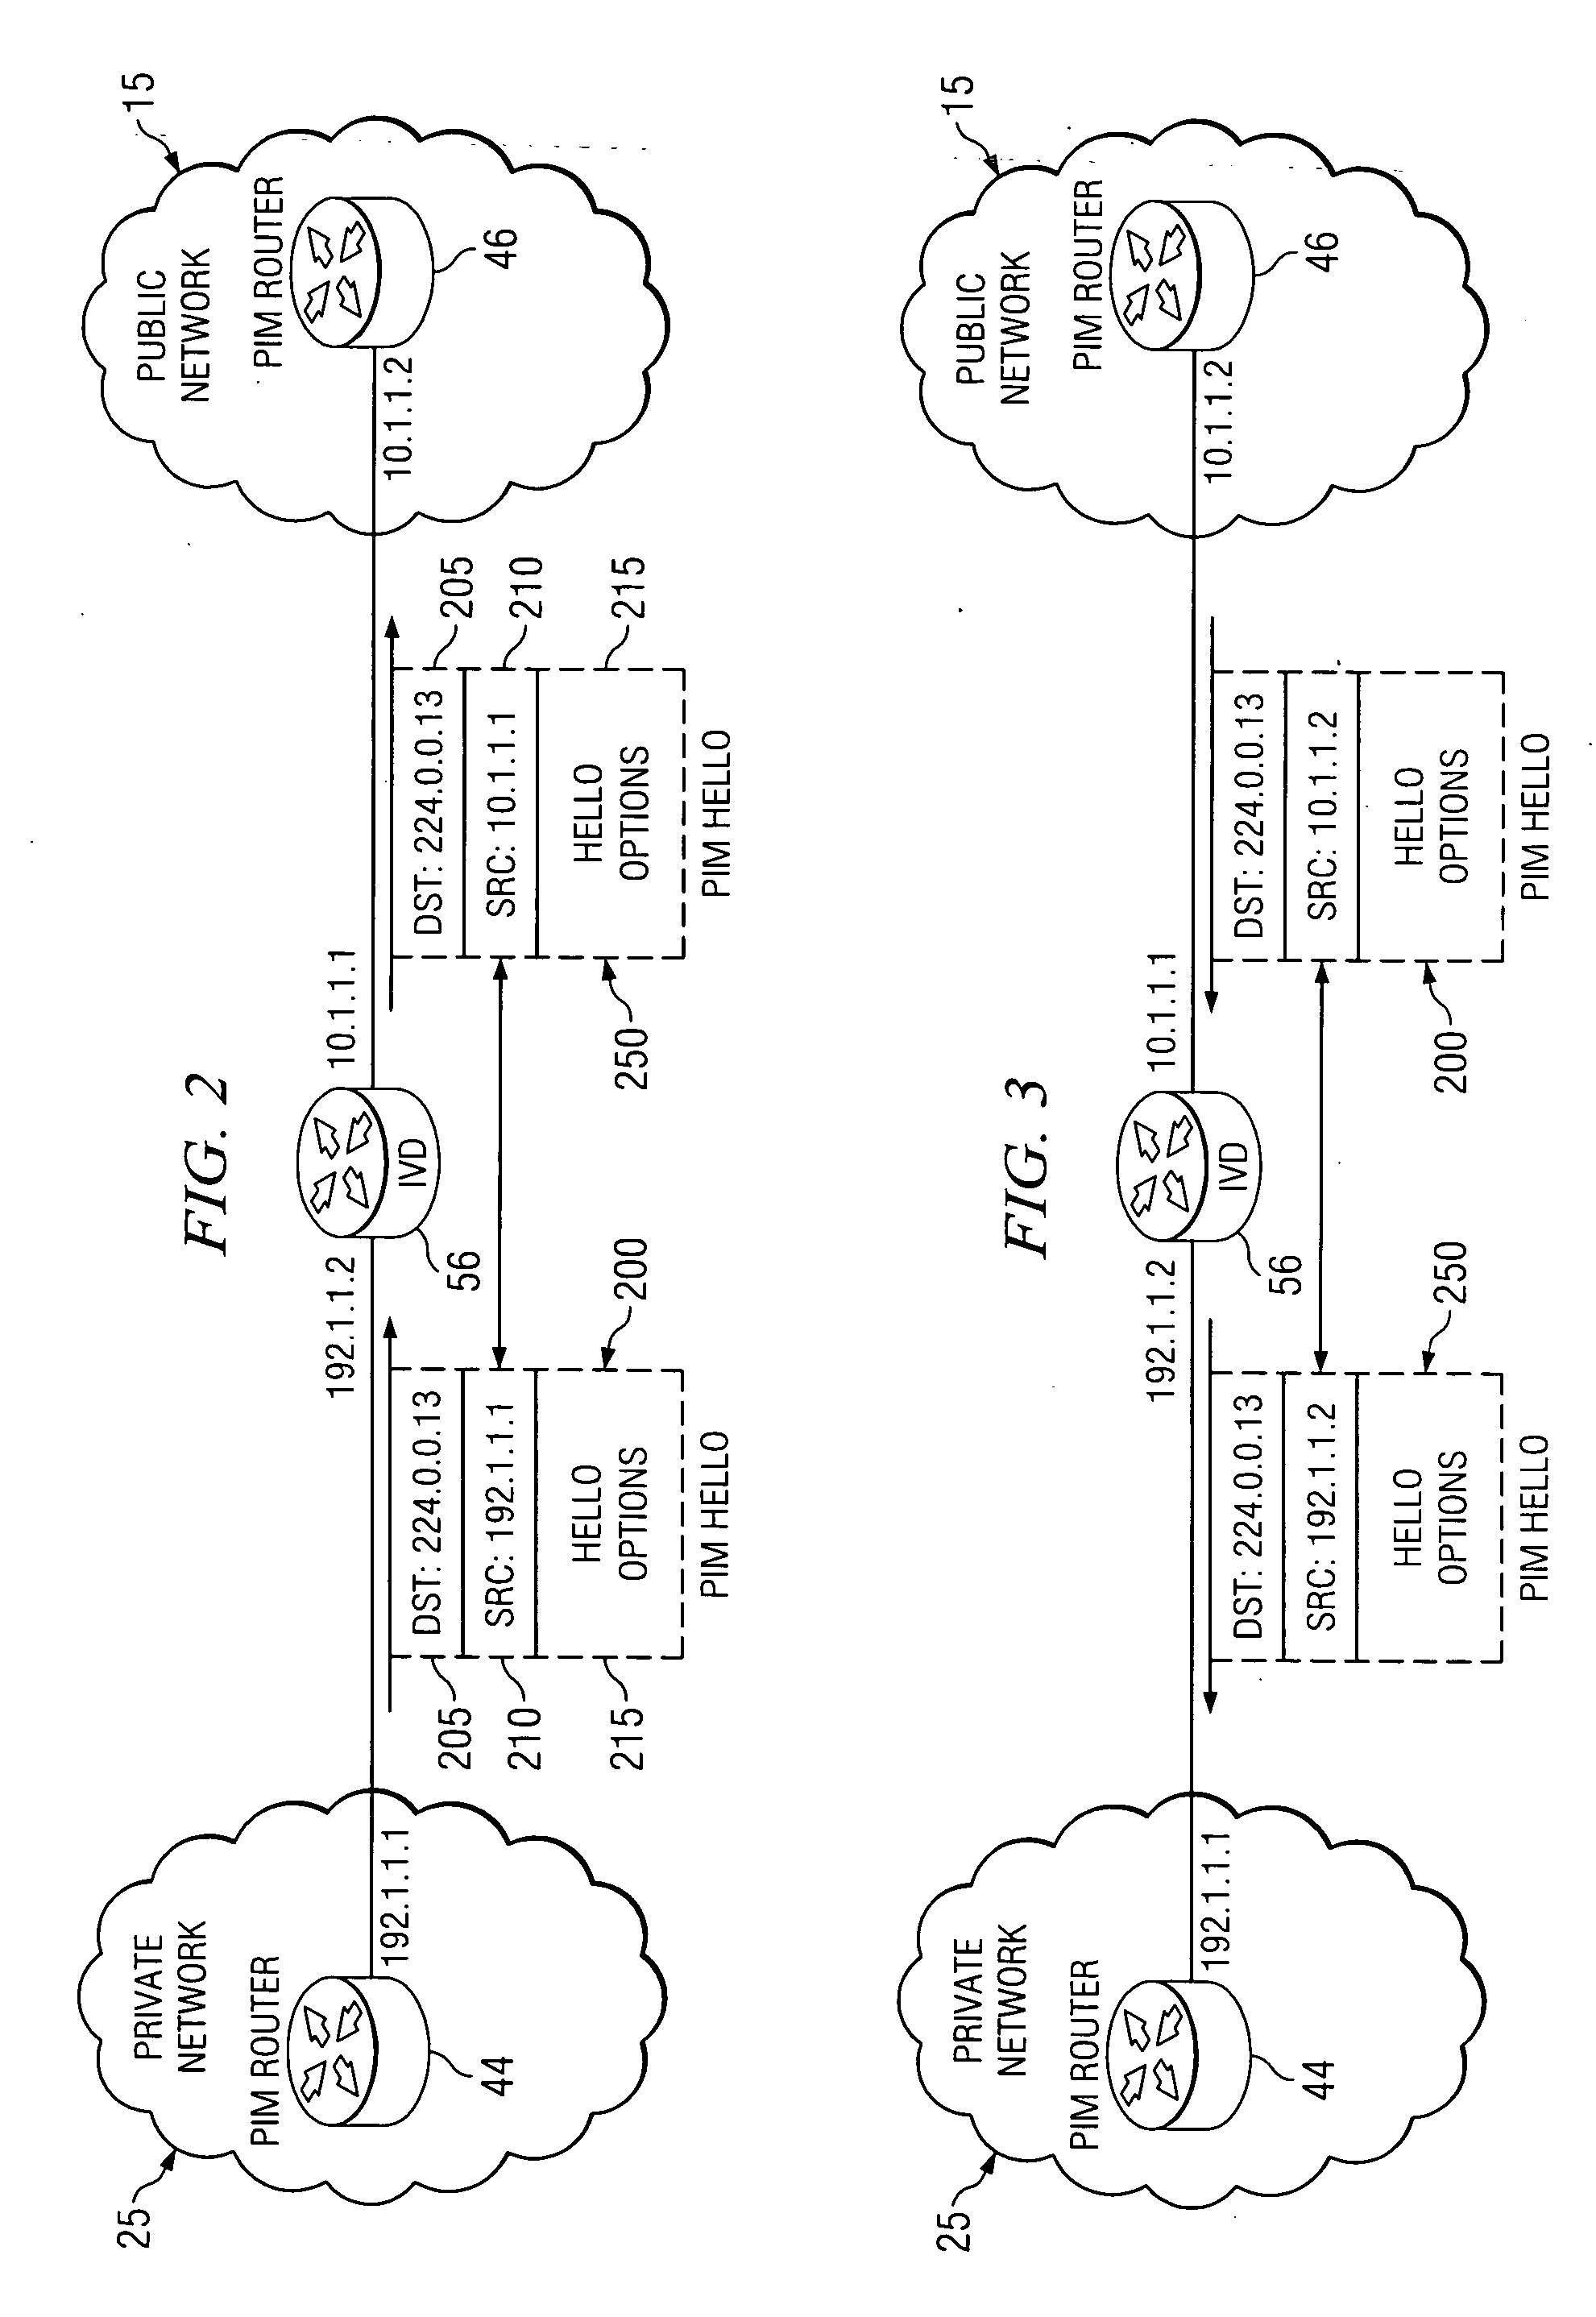 System and method for providing packet proxy services across virtual private networks